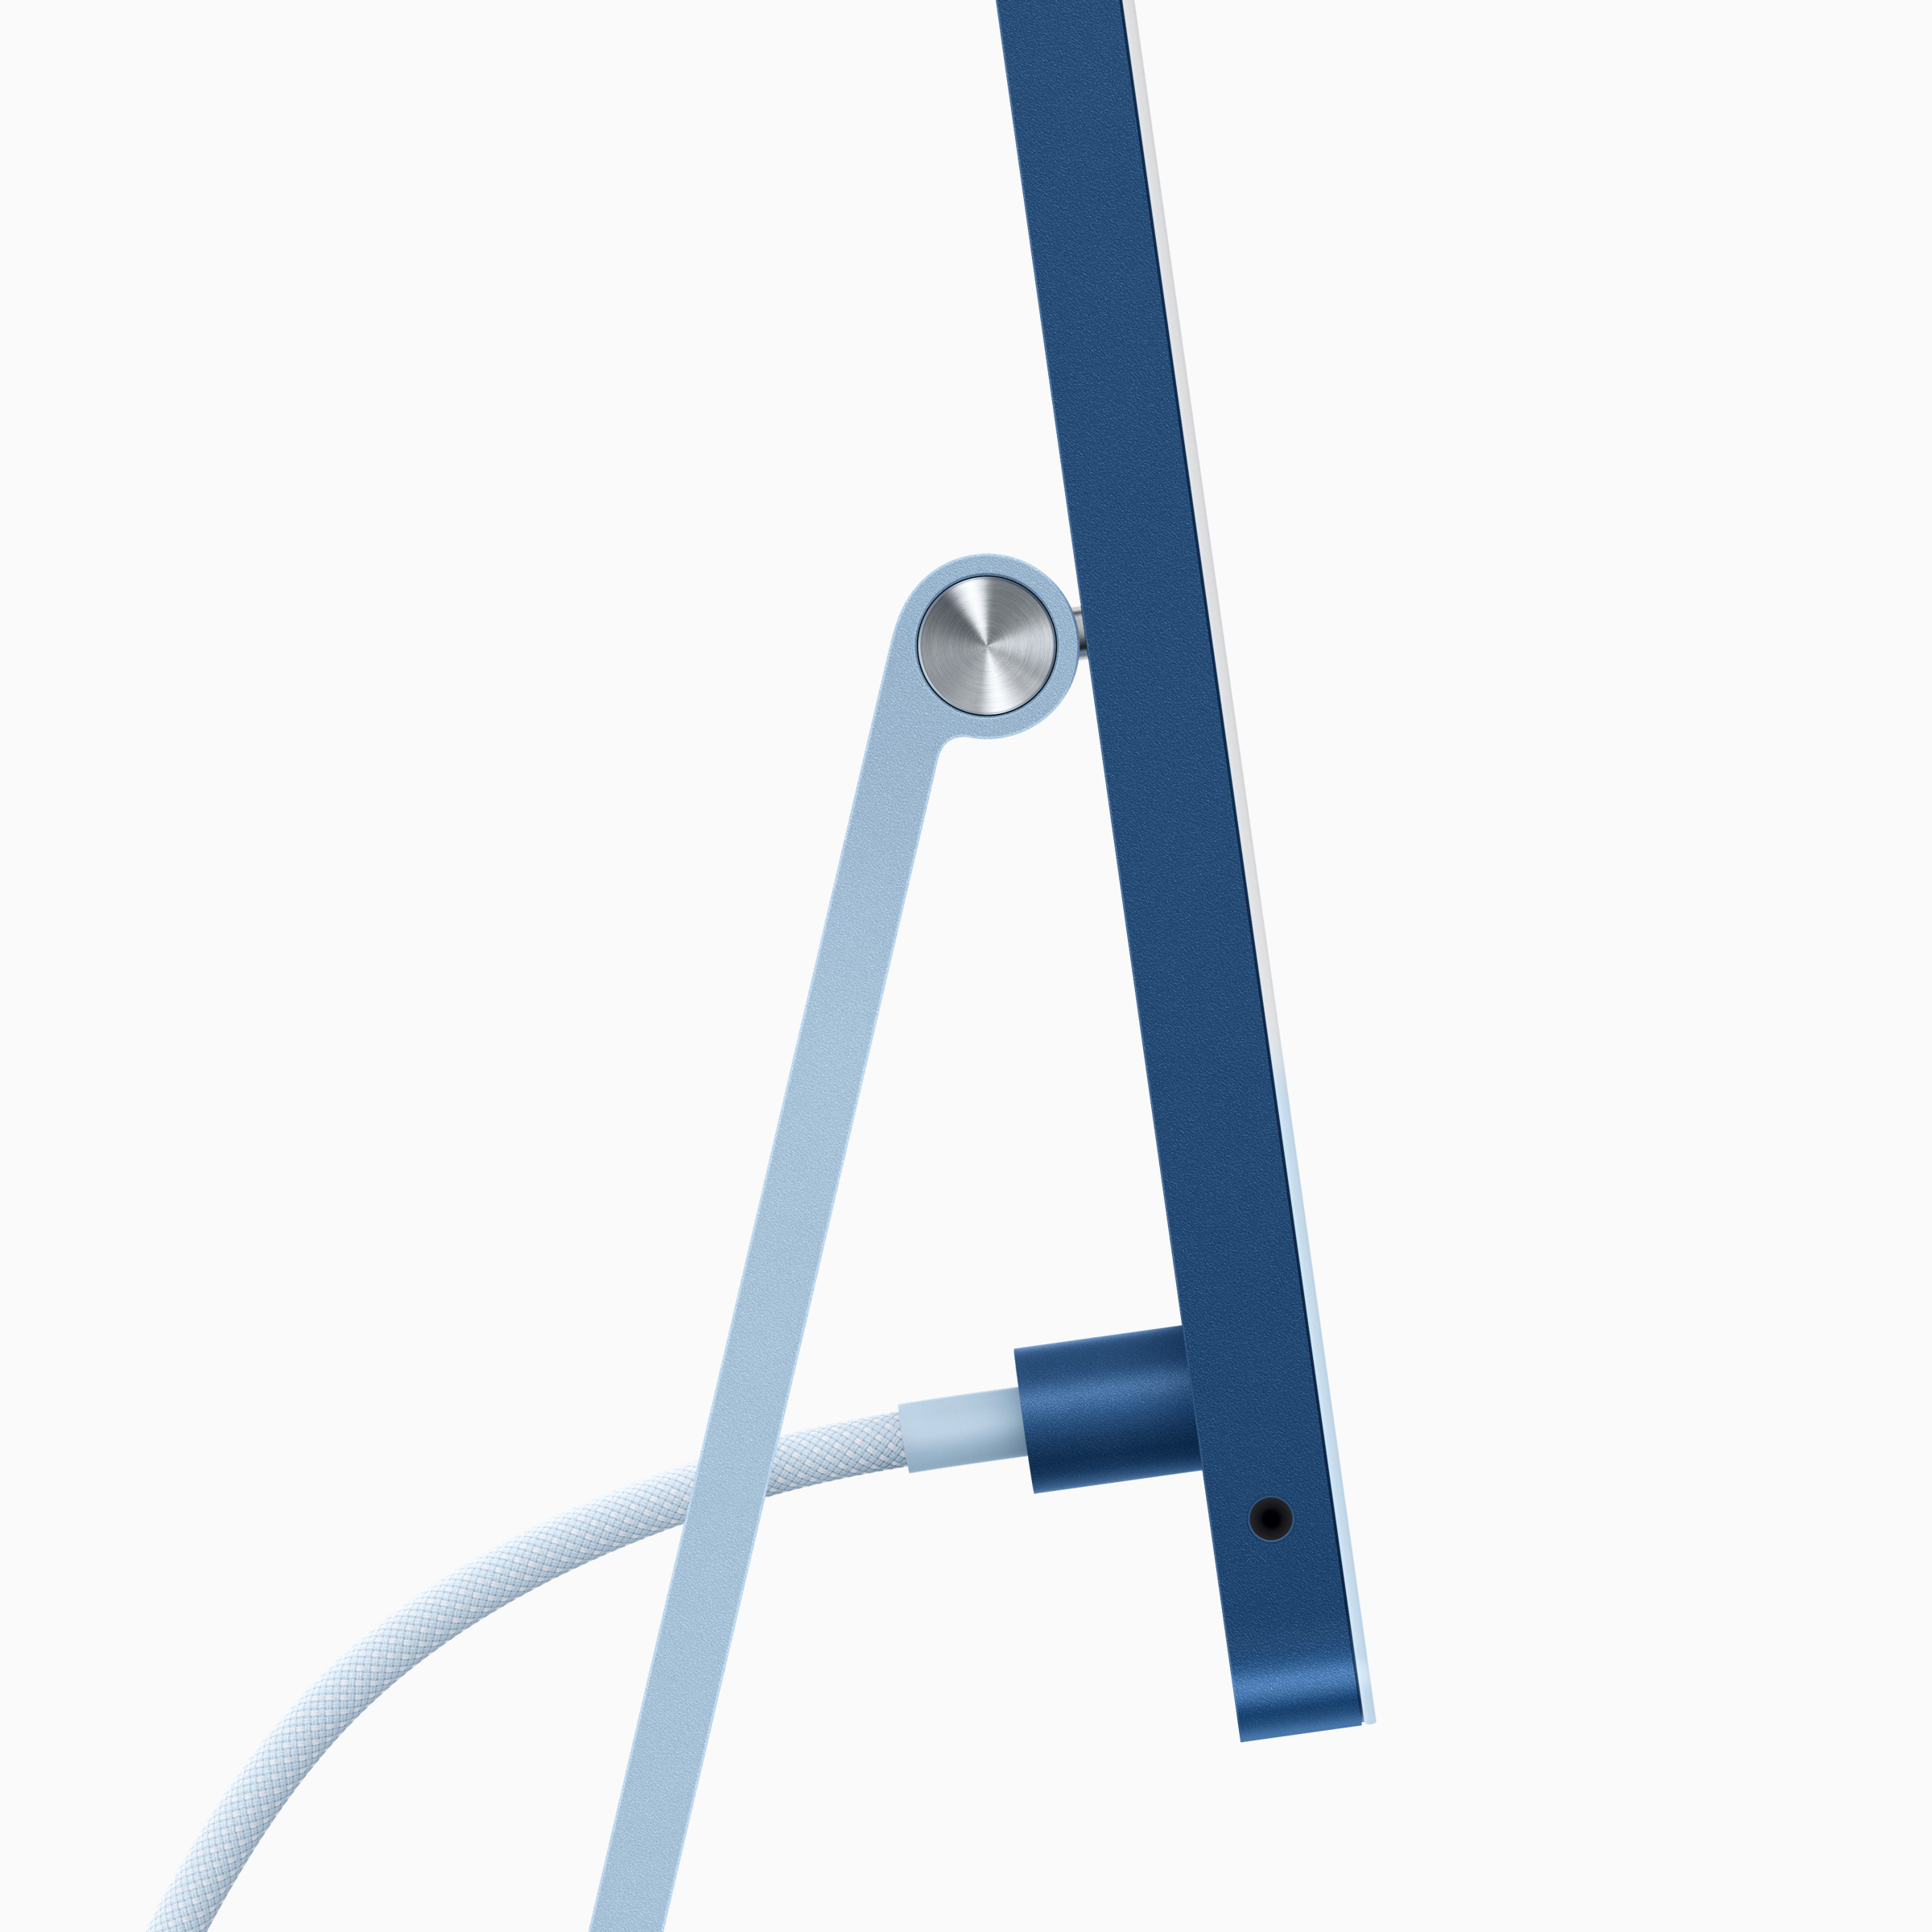 apple new imac spring21 ps blue cord connection 04202021